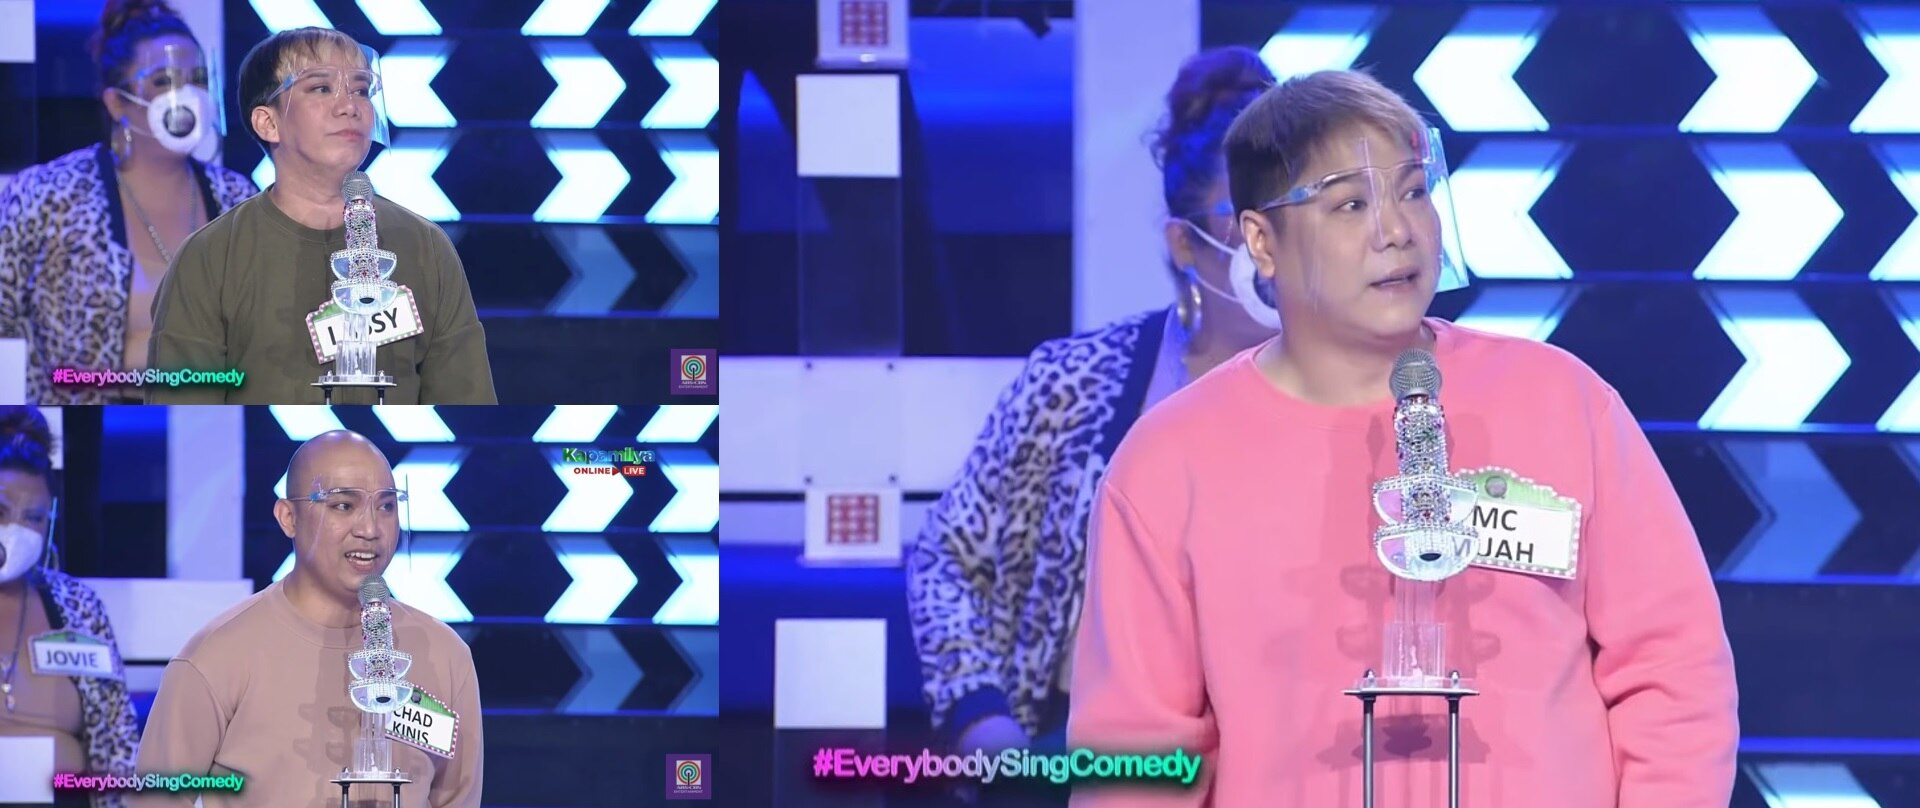 COMEDIANS LASSY, CHAD KINIS, AND MC AS PART OF EVERYBODY SING'S SONGBAYANAN